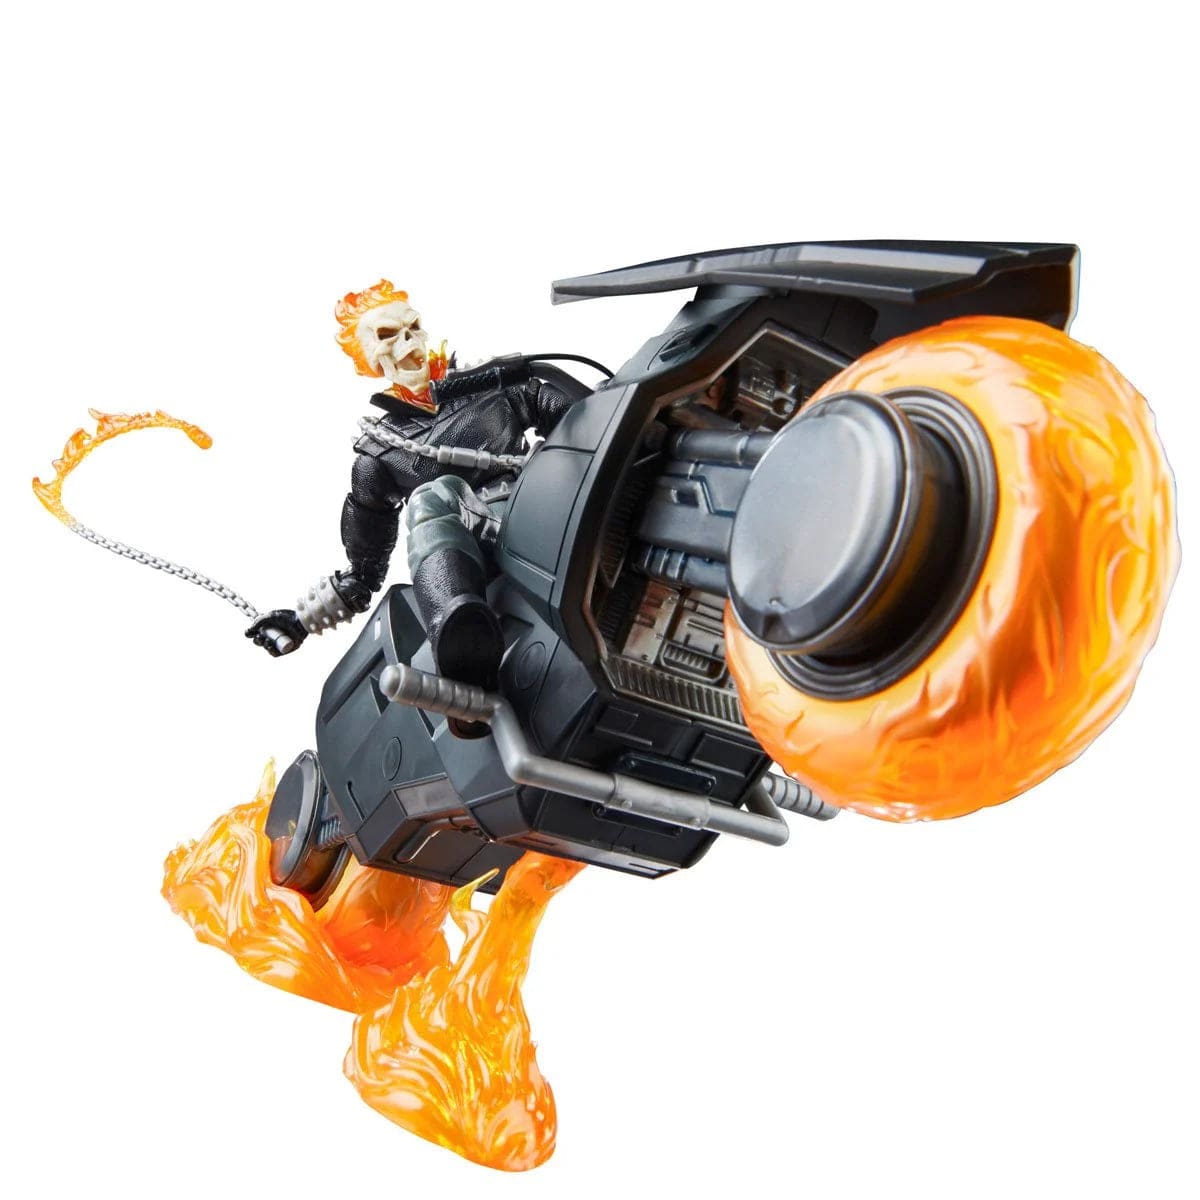 Marvel-Legends-Series-Ghost-Rider-_Danny-Ketch_-with-Motorcycle-Action-Figure-Pose-Bike